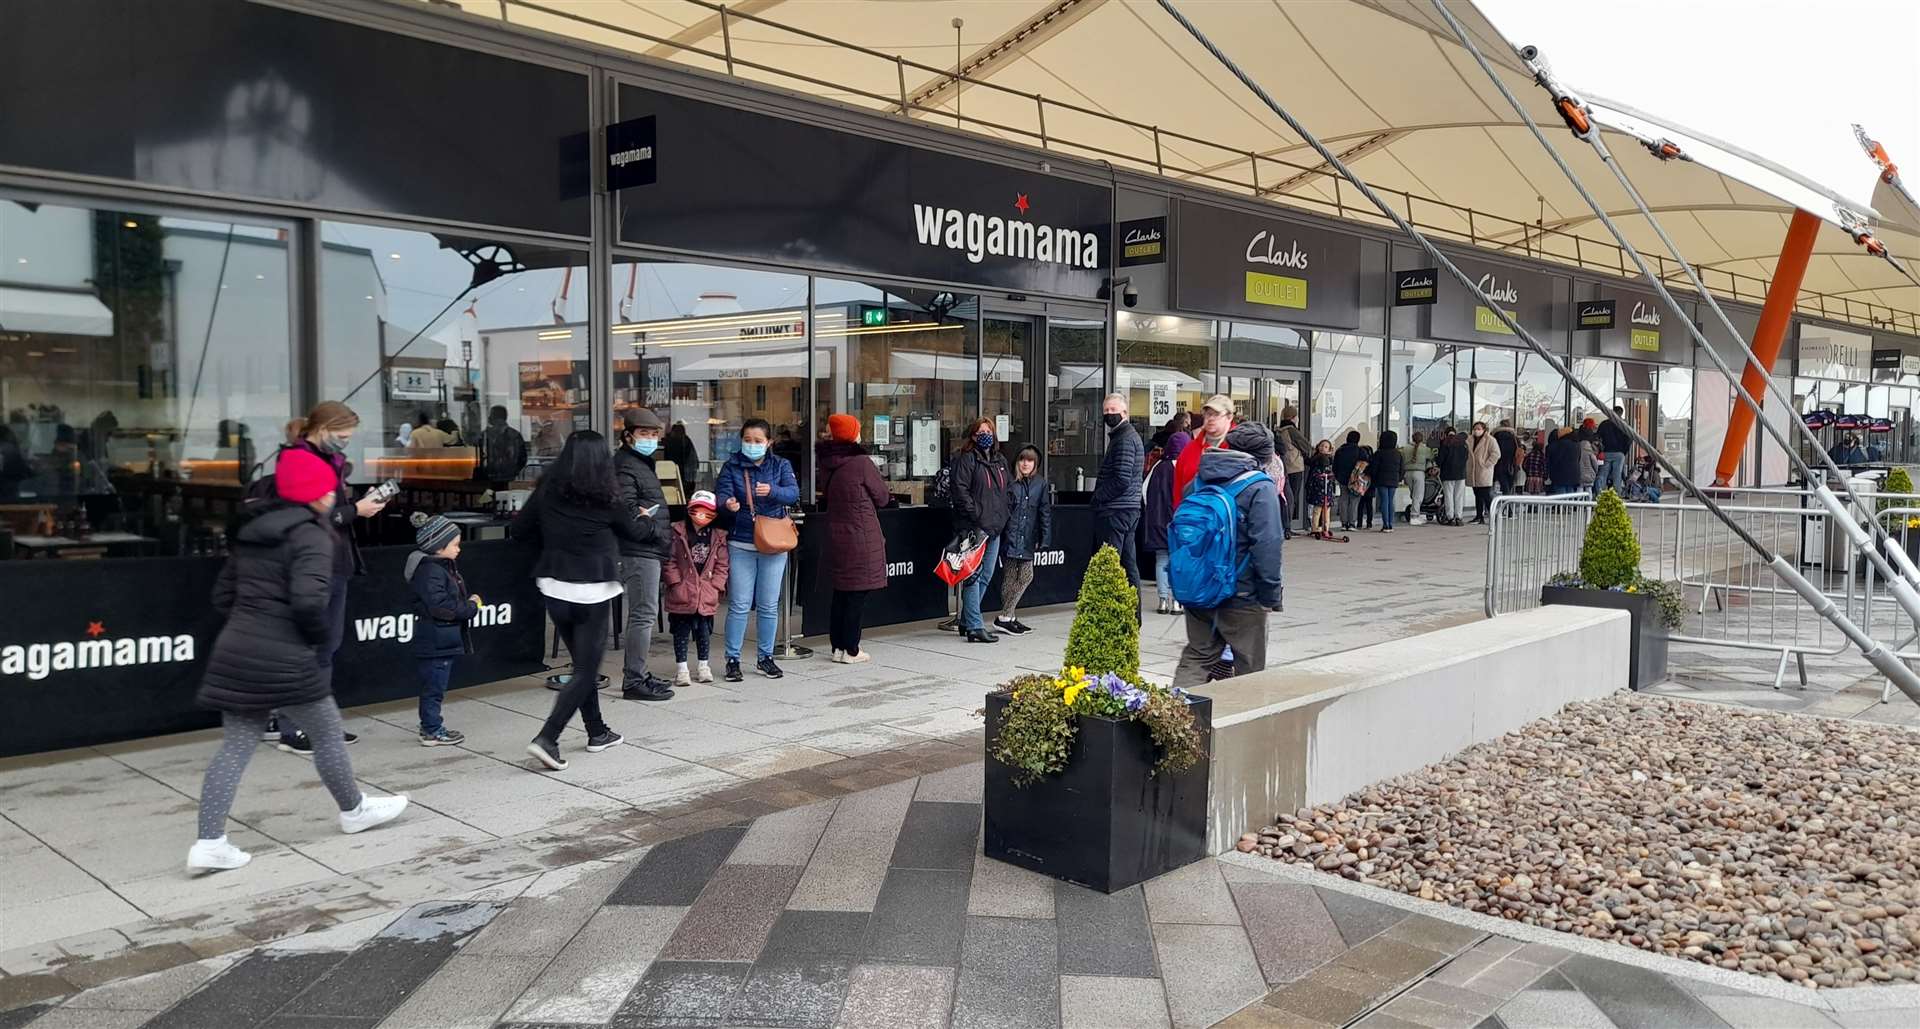 Queues were building early this morning at the Designer Outlet